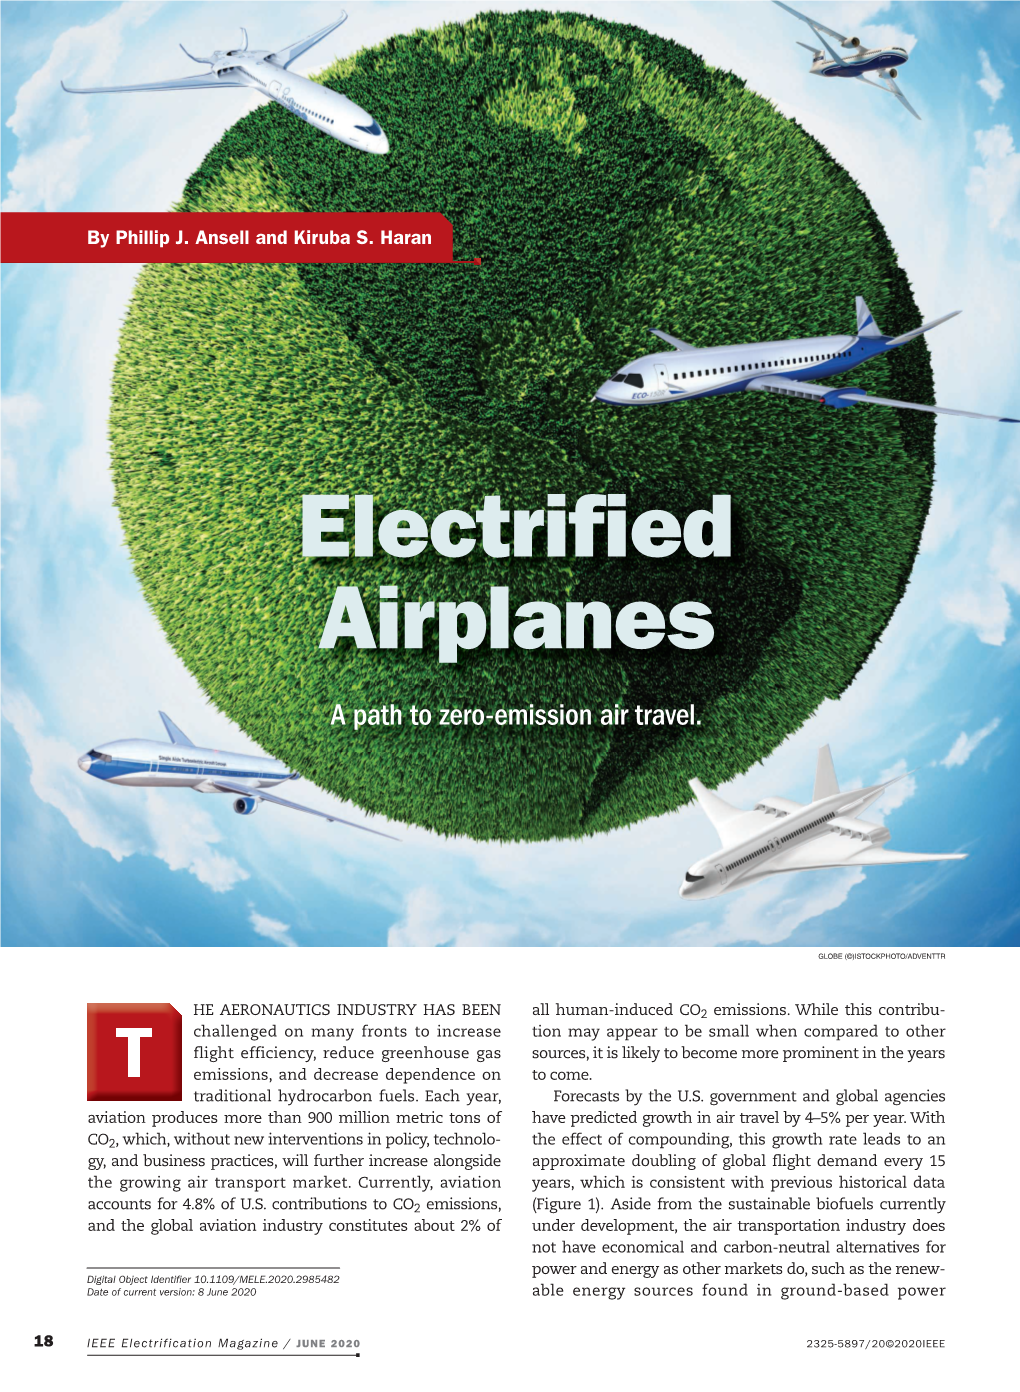 Electrified Airplanes